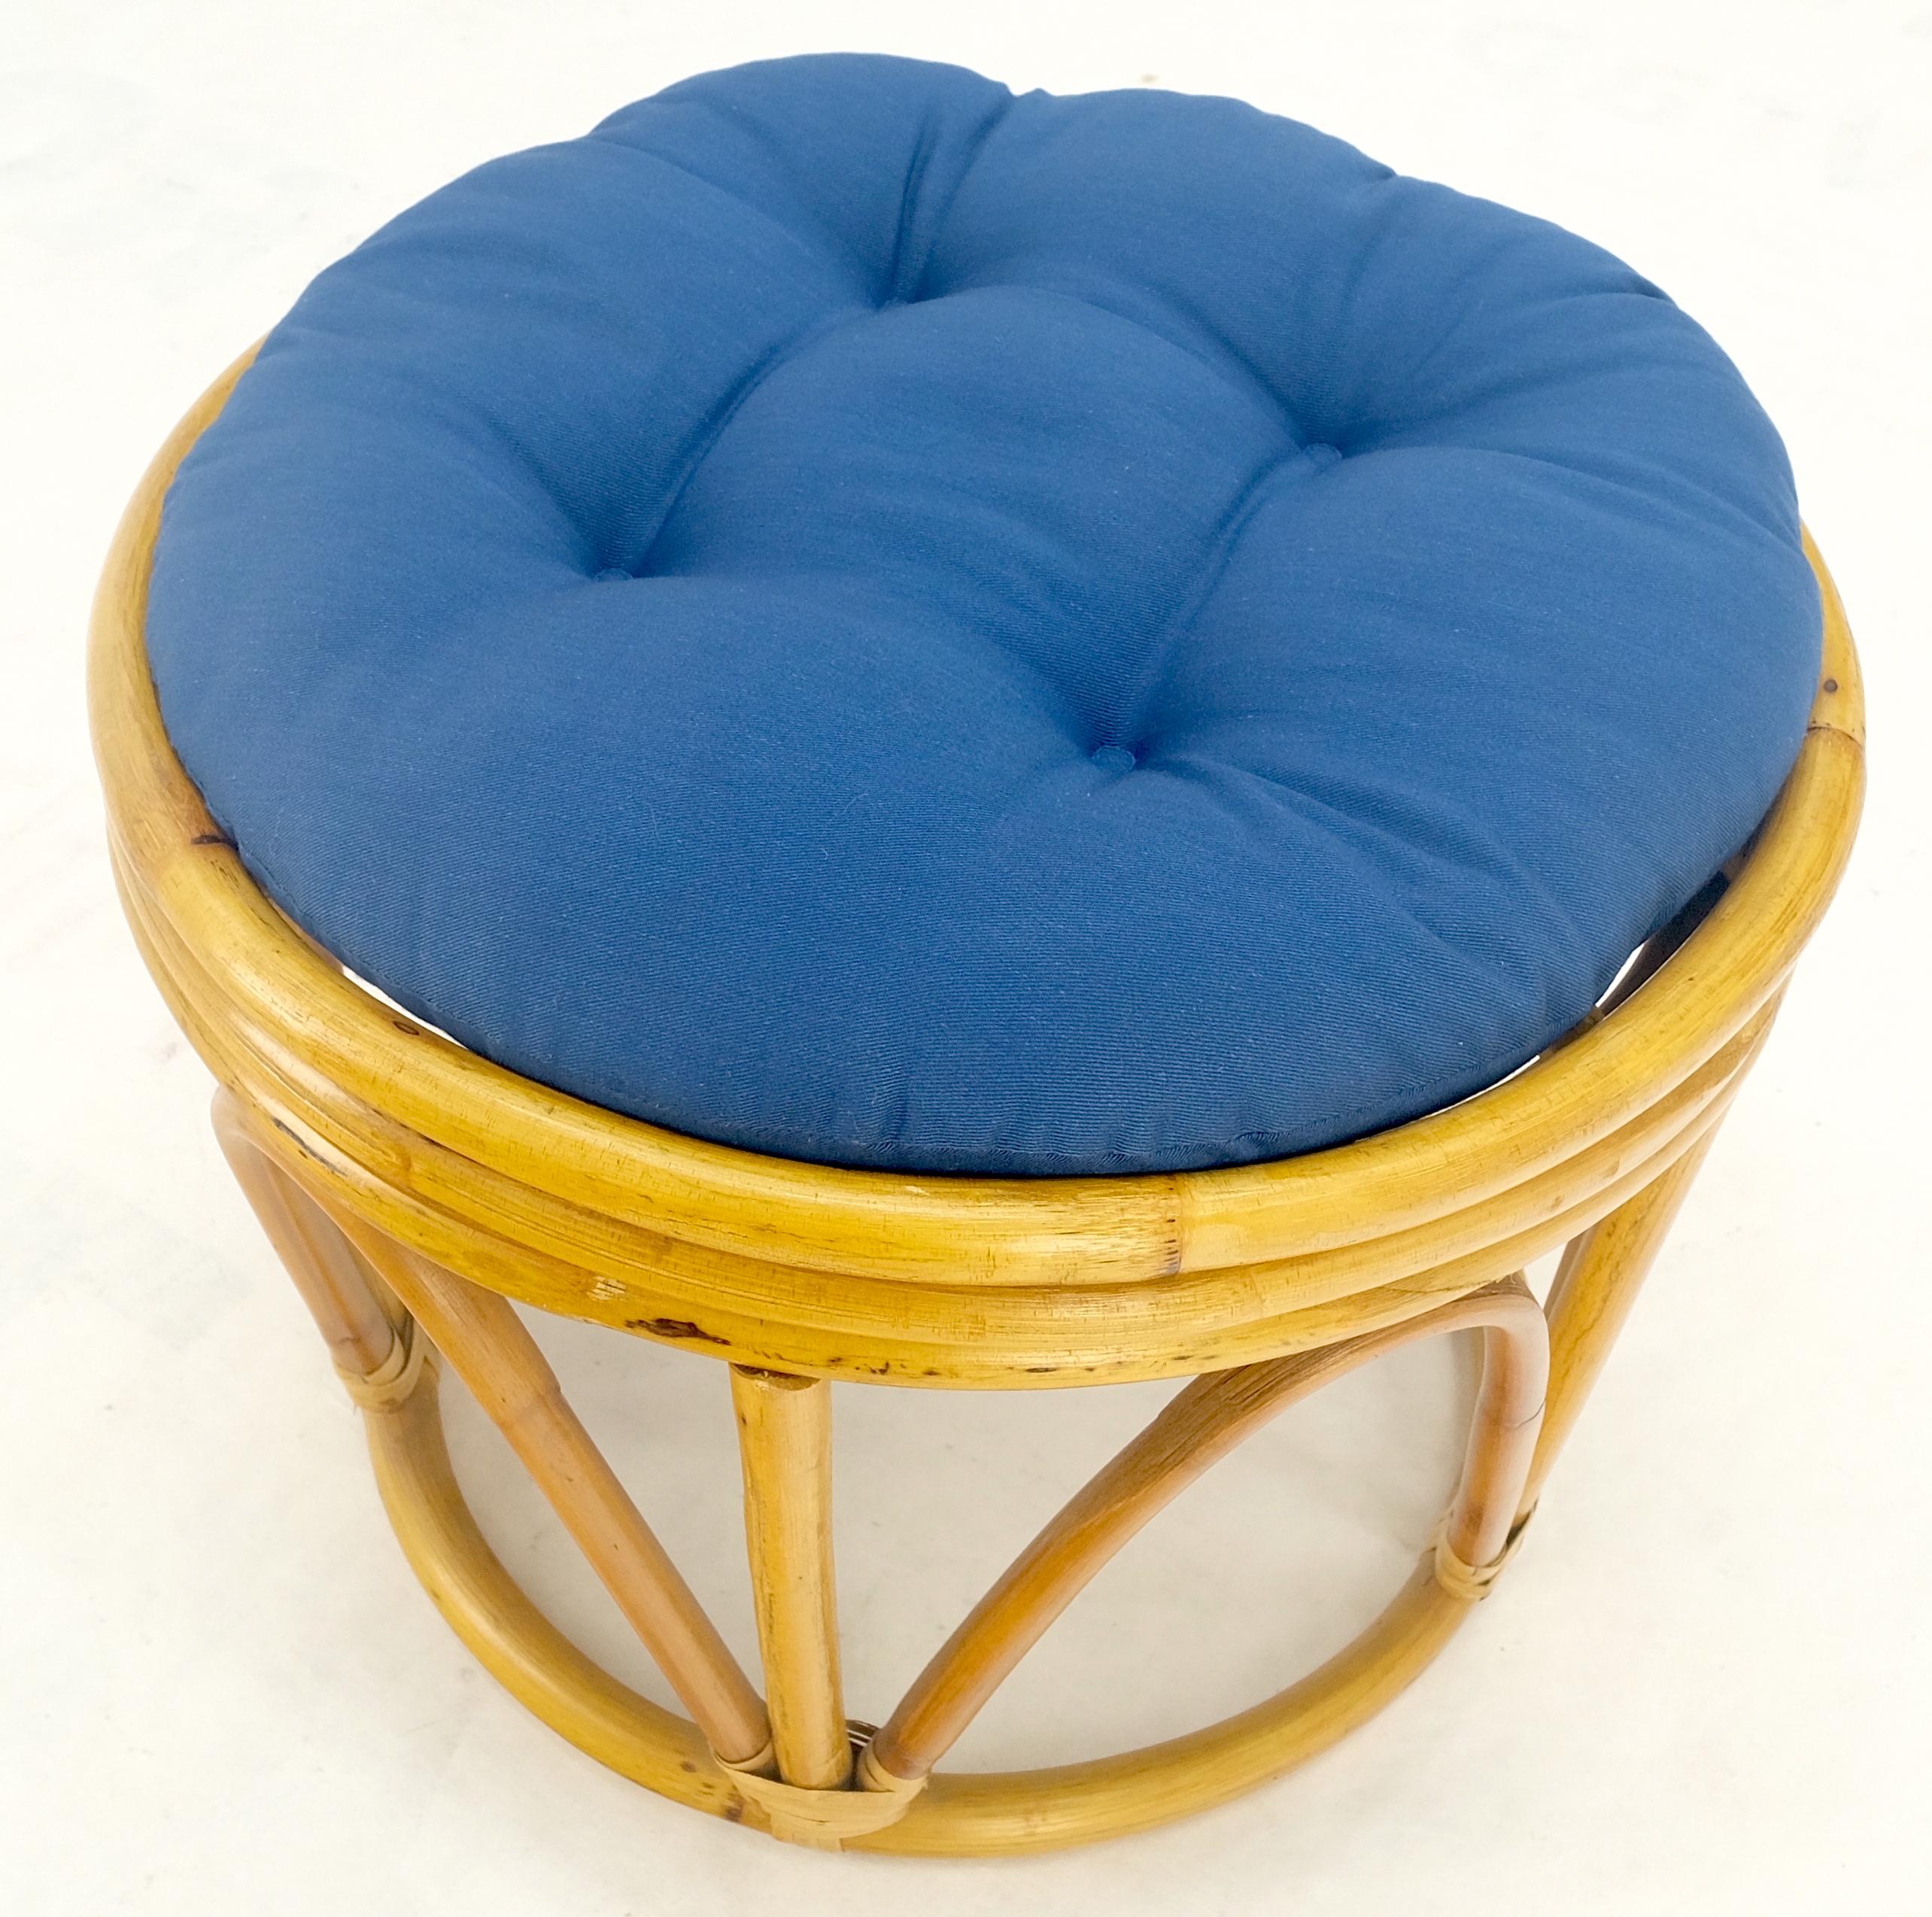 20th Century Round Mid Century Modern  Blue Upholstery Ottoman Foot Stool Bench Pouf MINT! For Sale